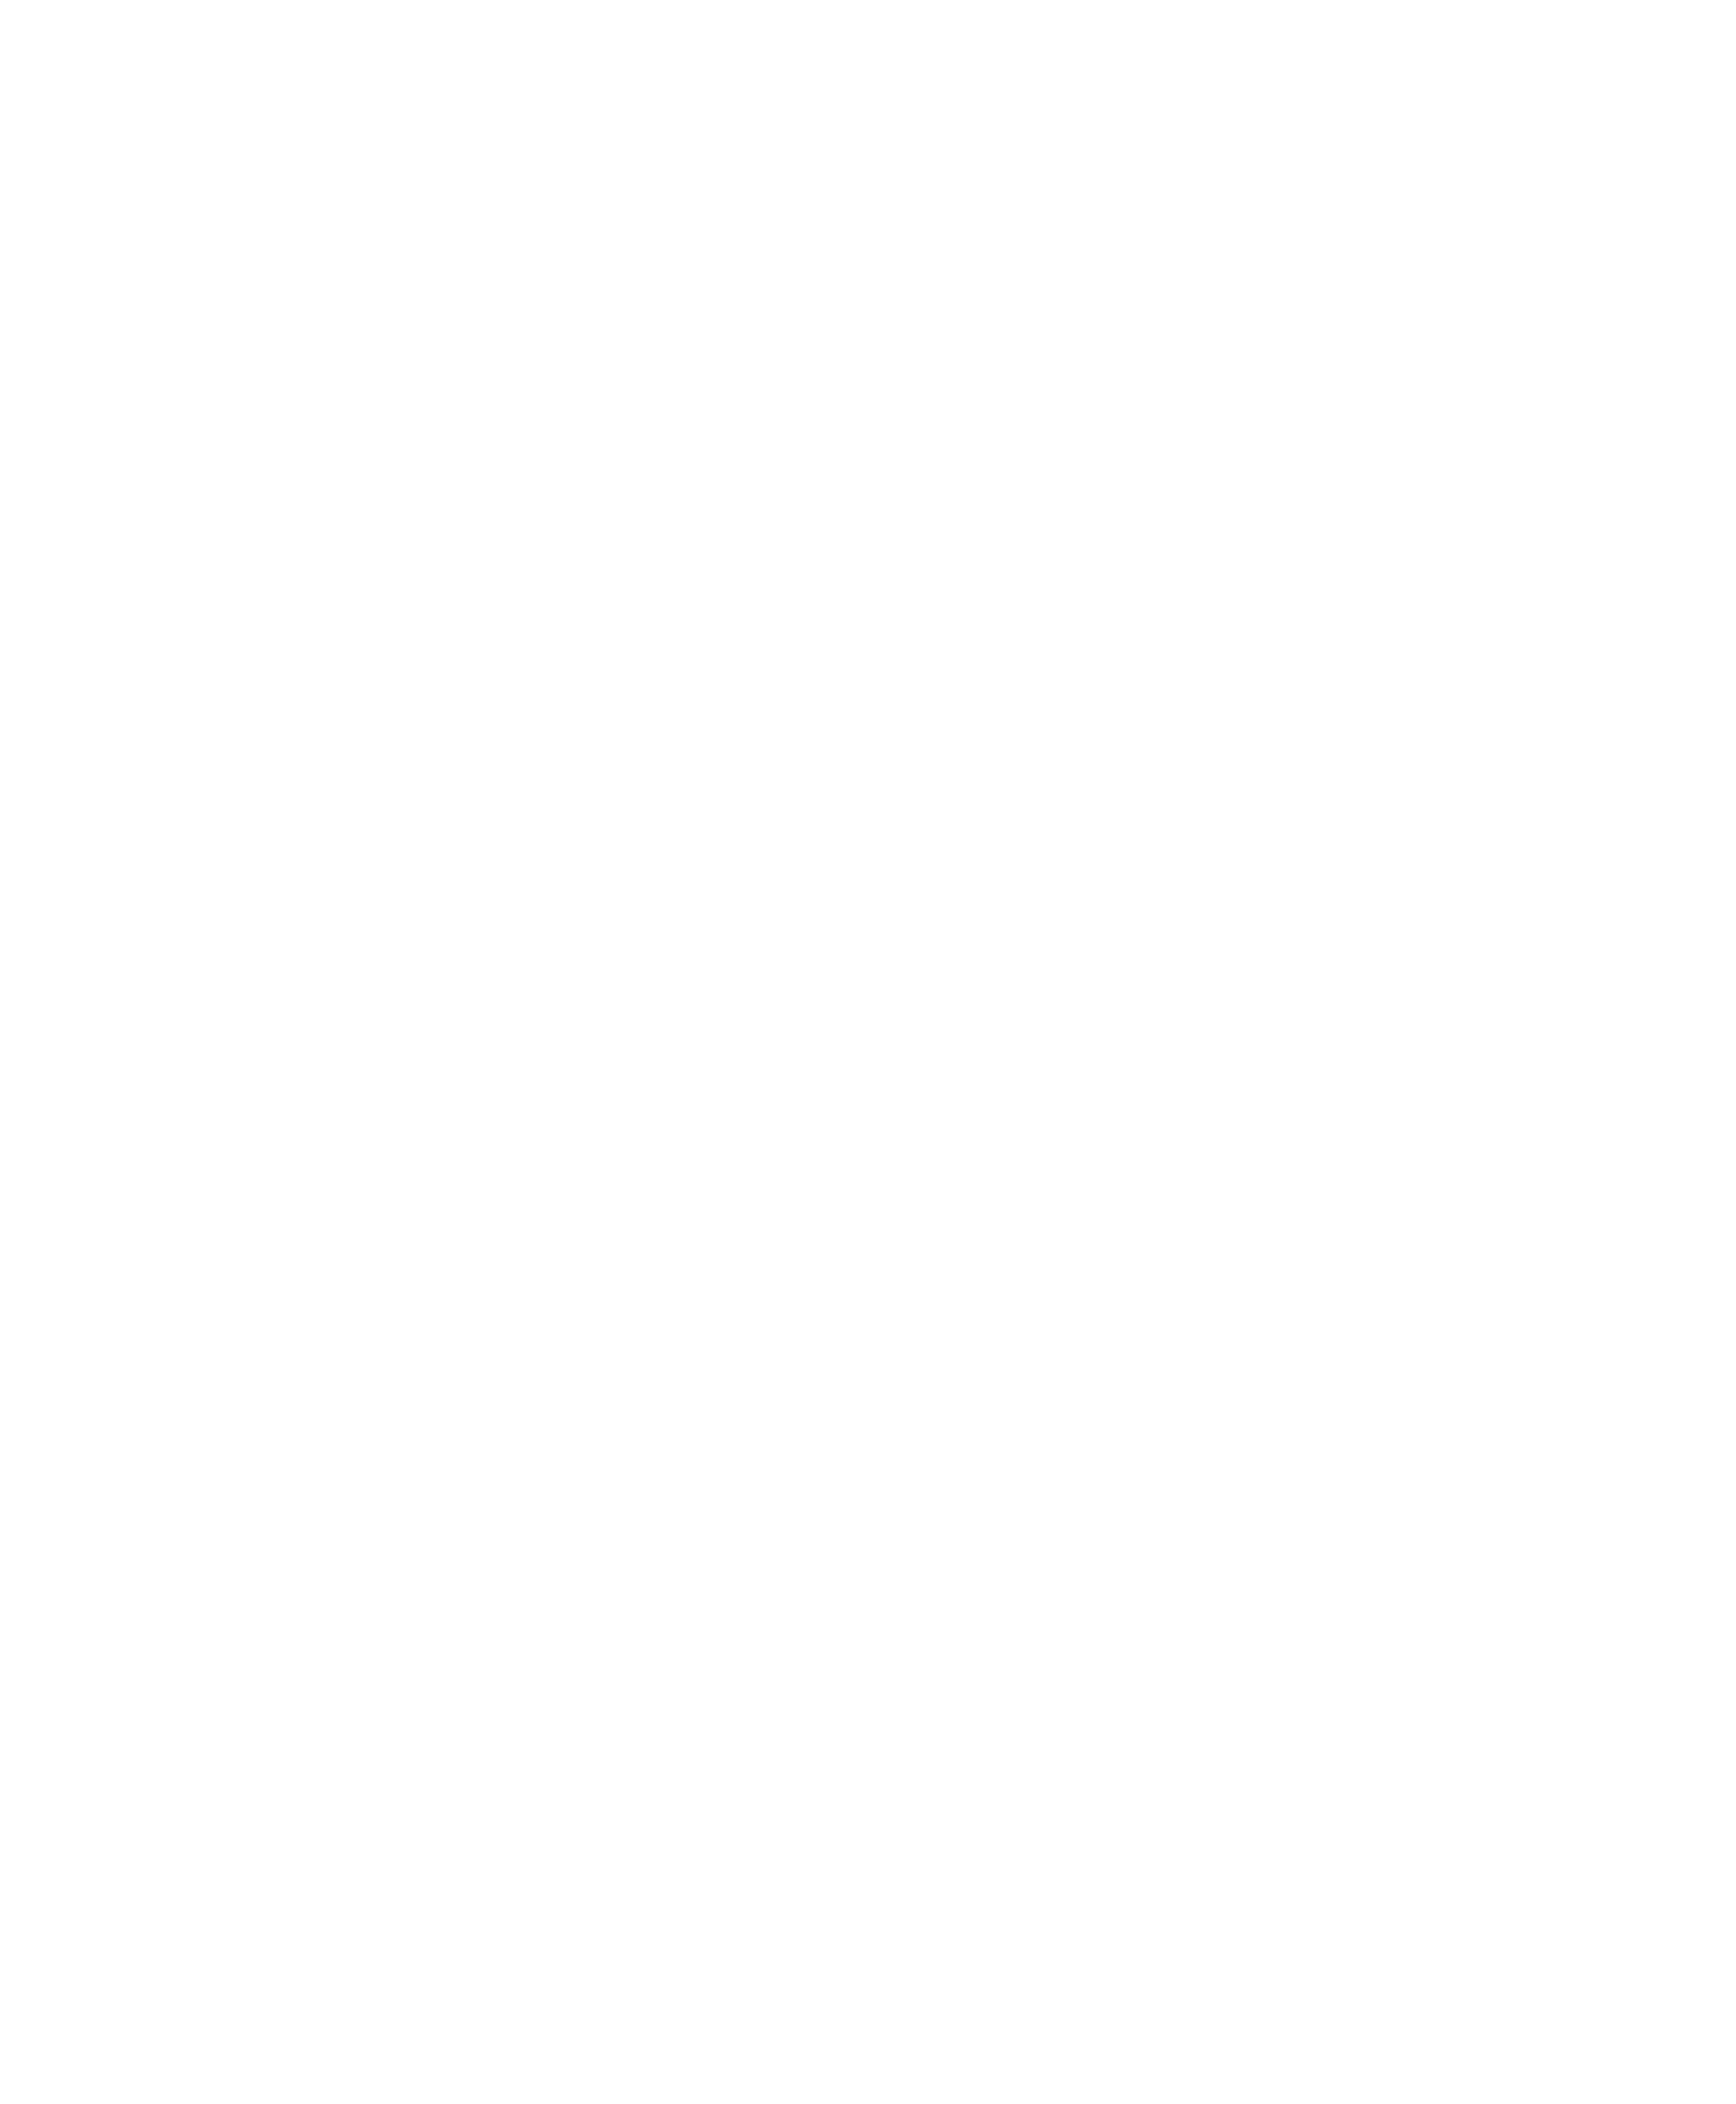 TO GREEN SOLUTIONS WATERING SYSTEMS